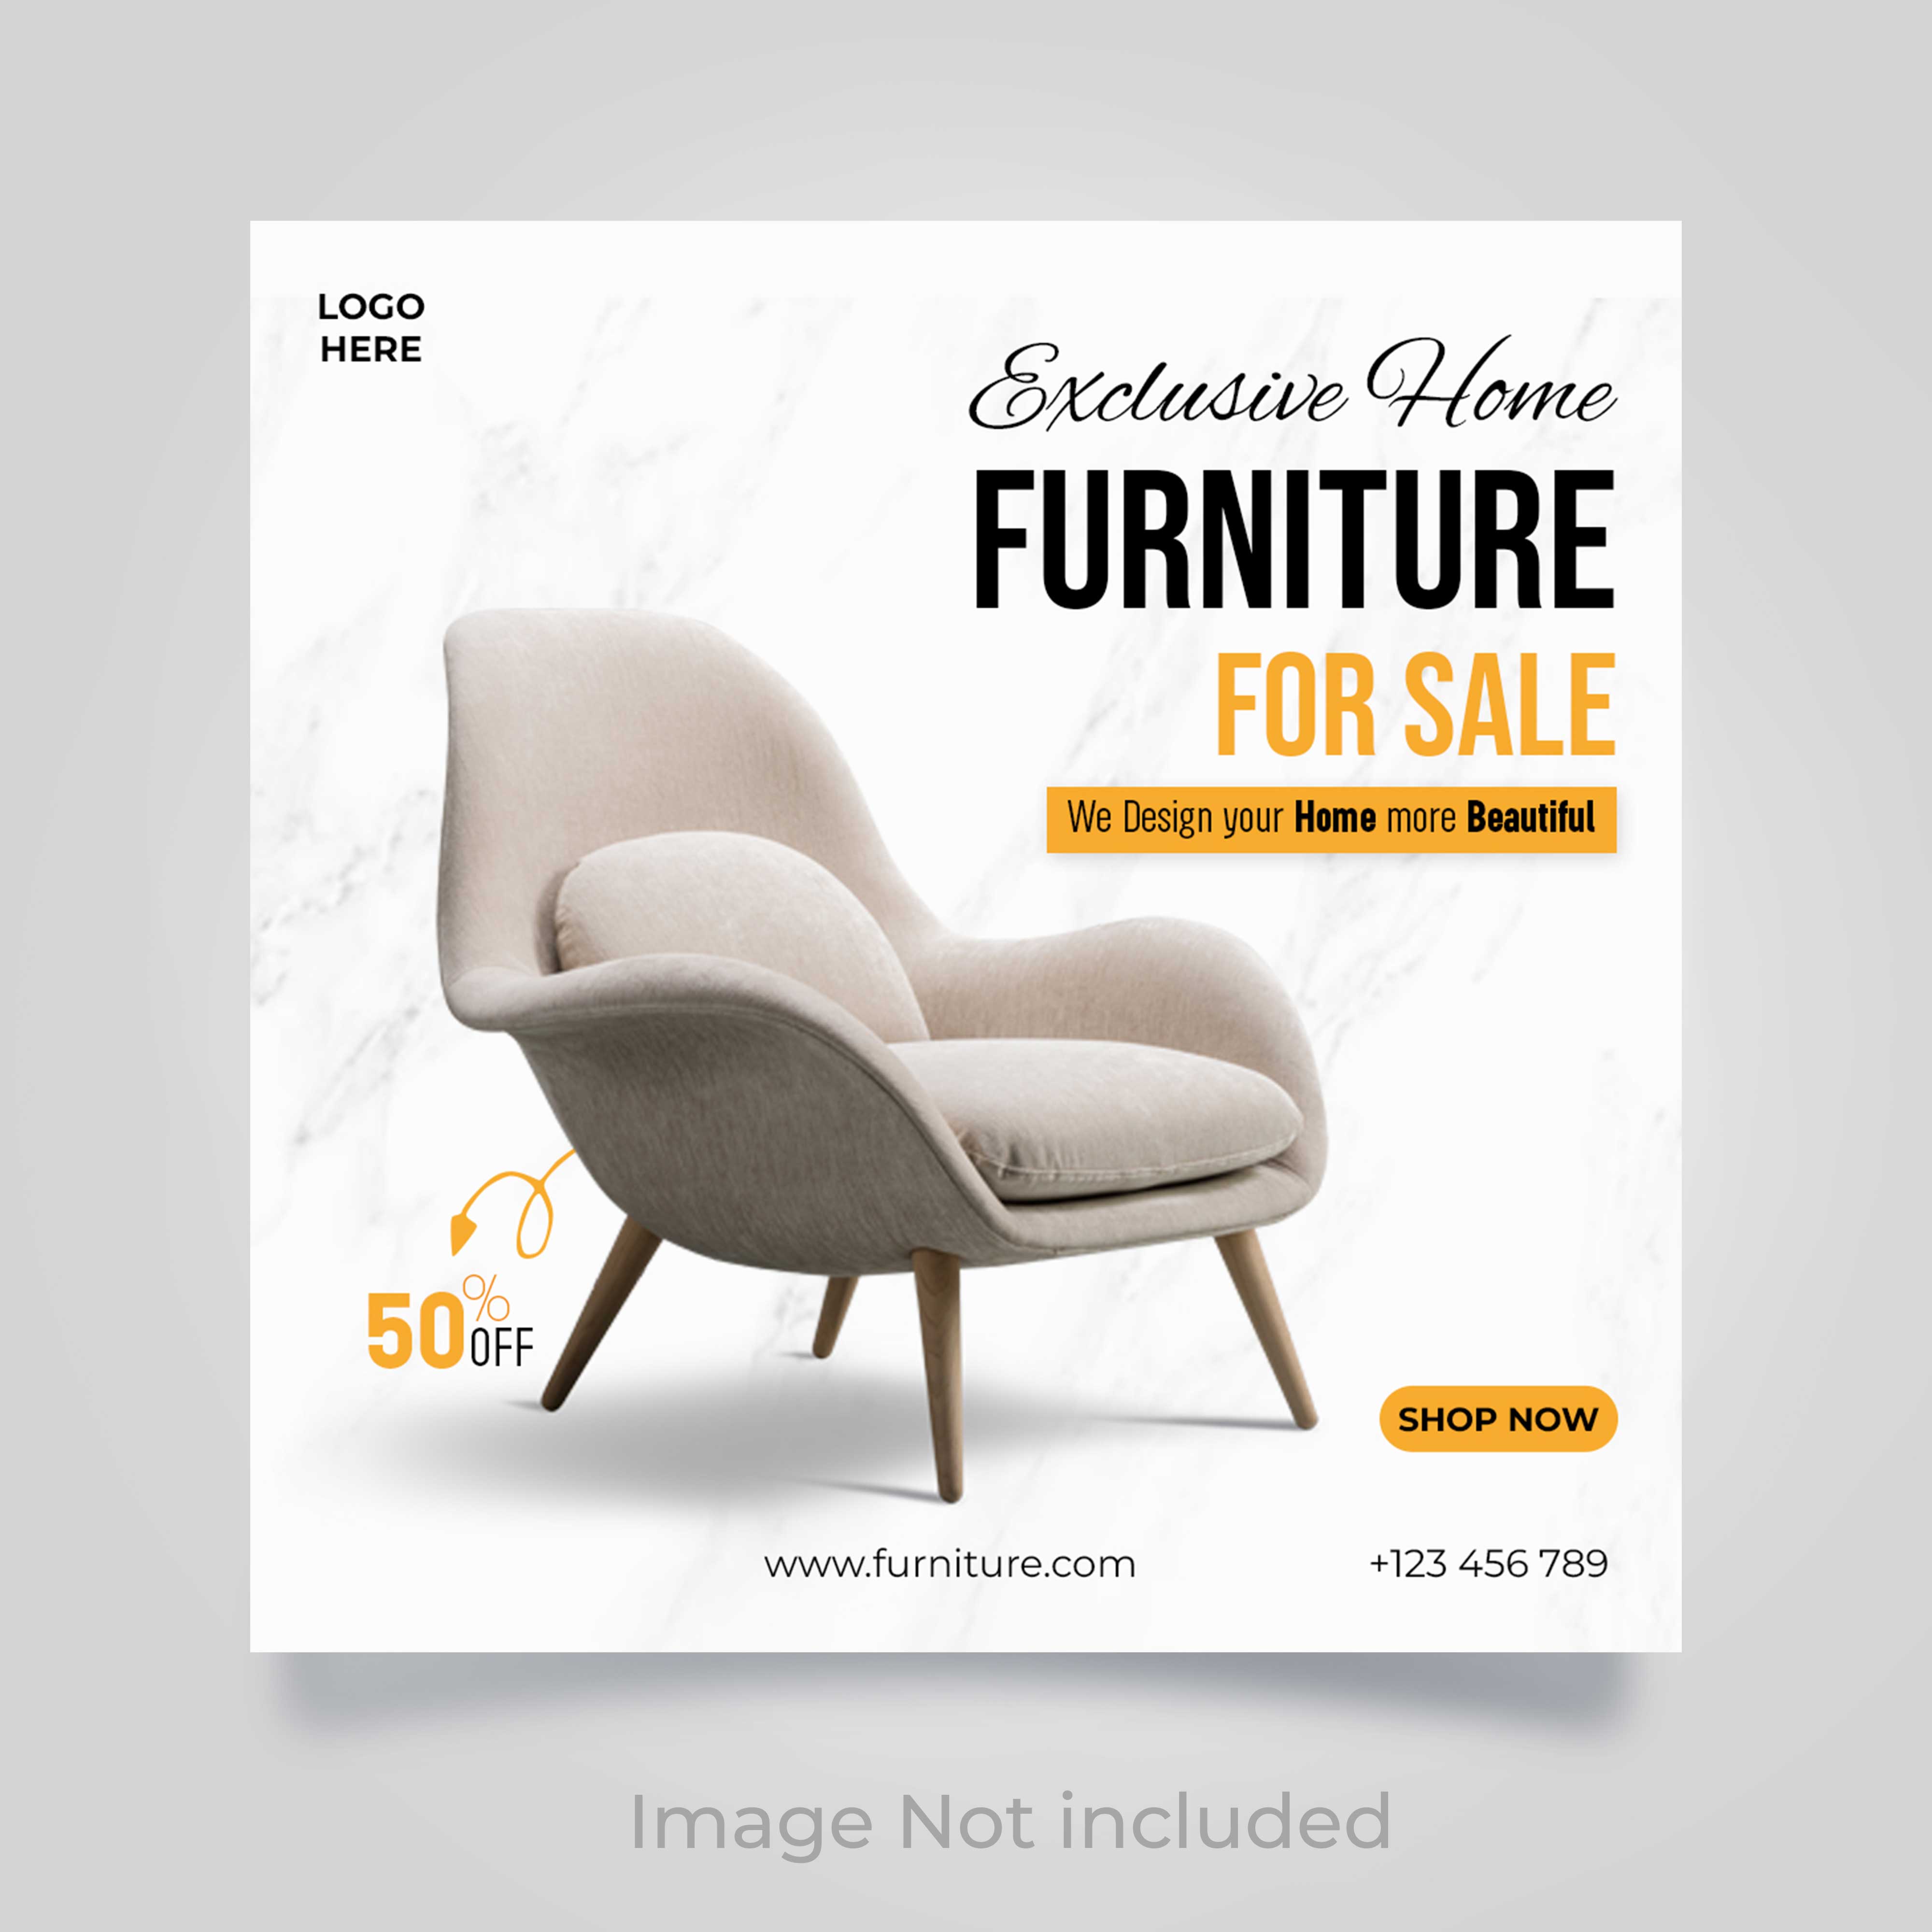 Flyer for furniture sale with a chair.